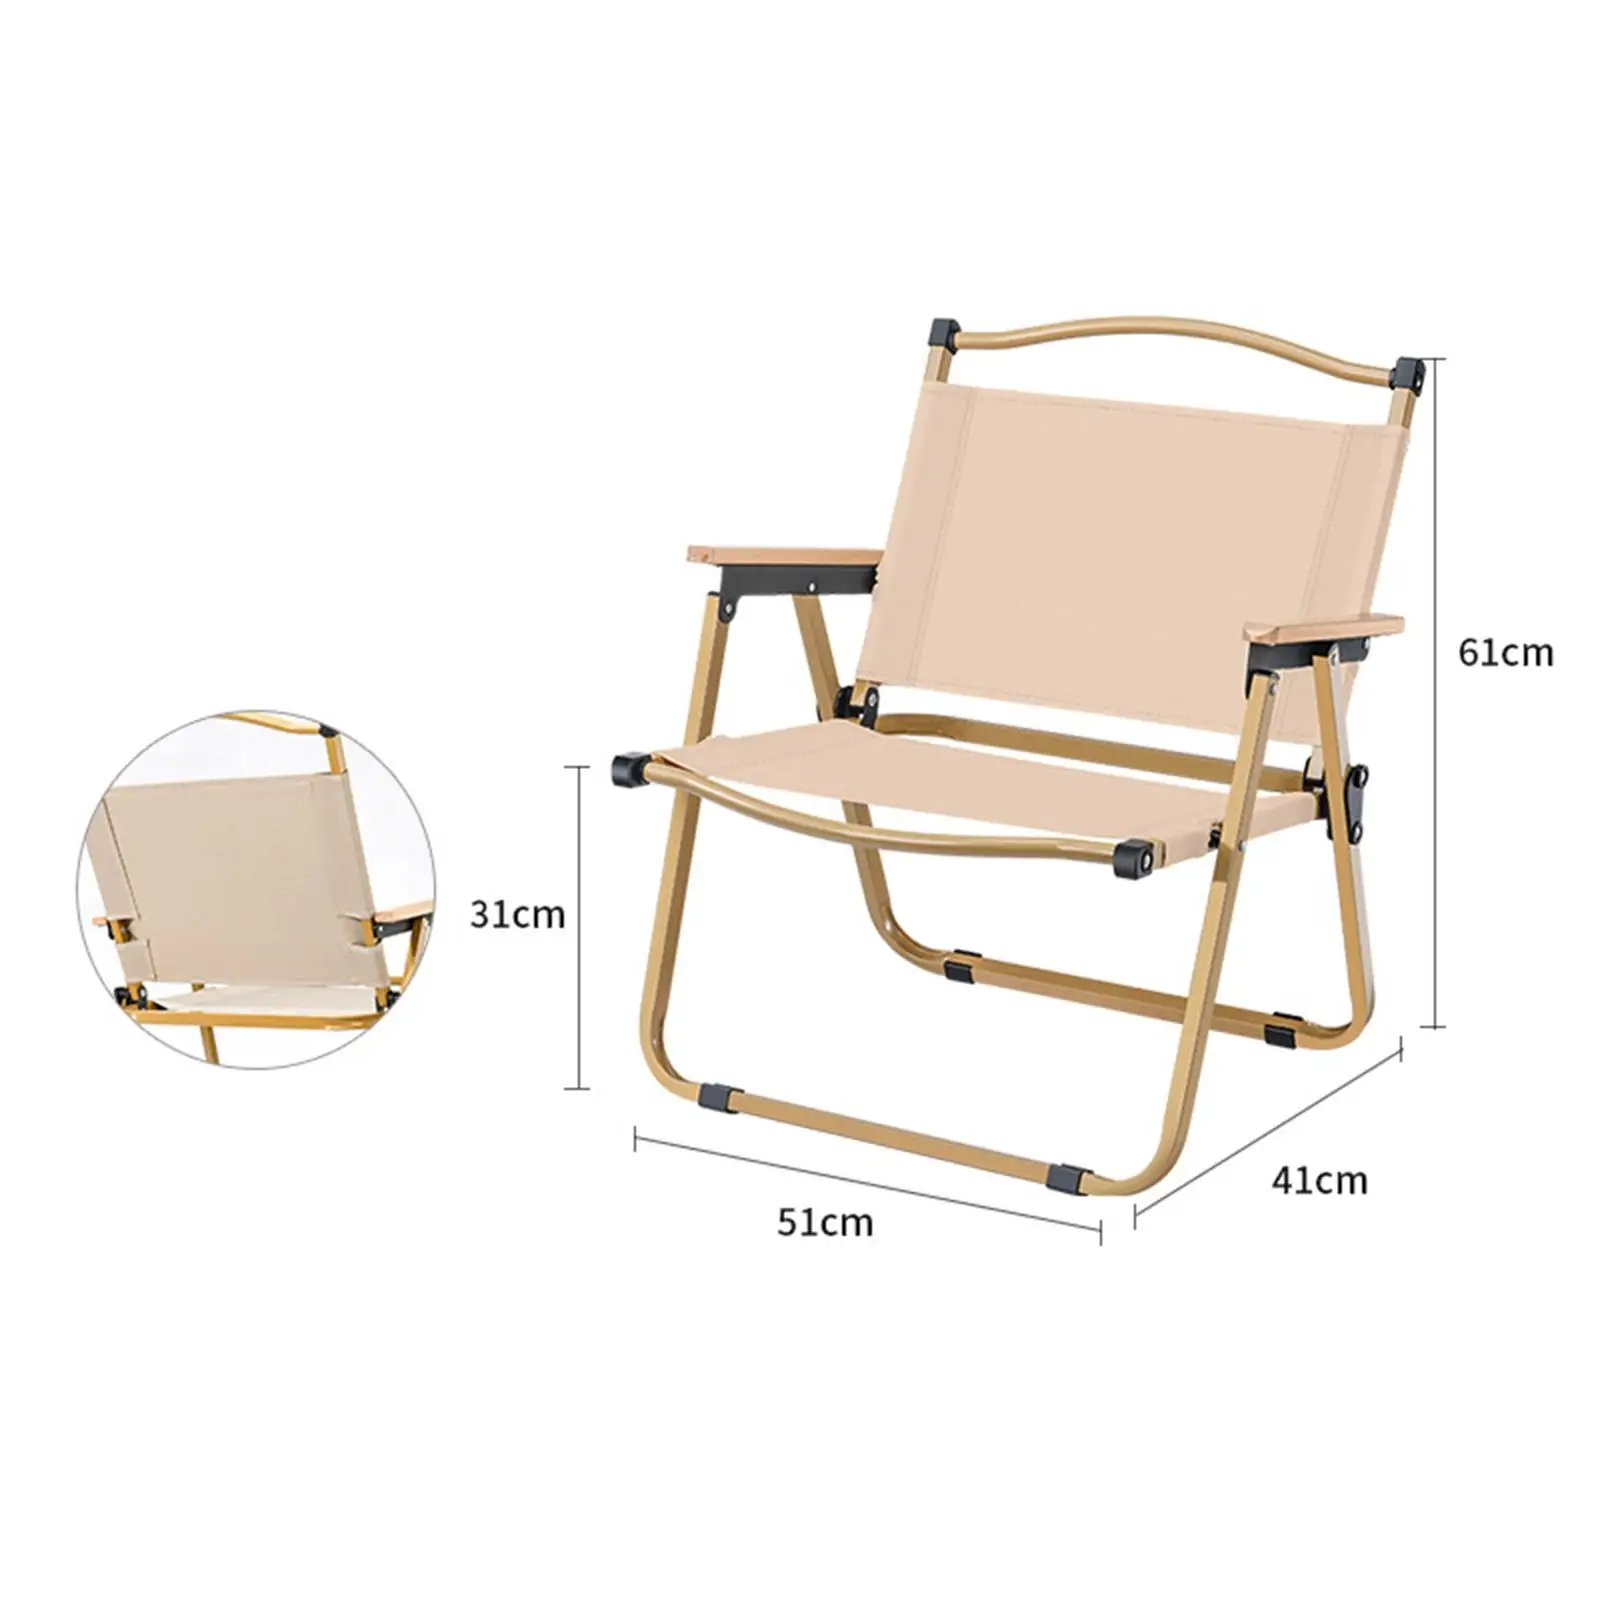 Camping Chair, Fishing Chair, Camping Seat, Folding Chair for Park, Beach,